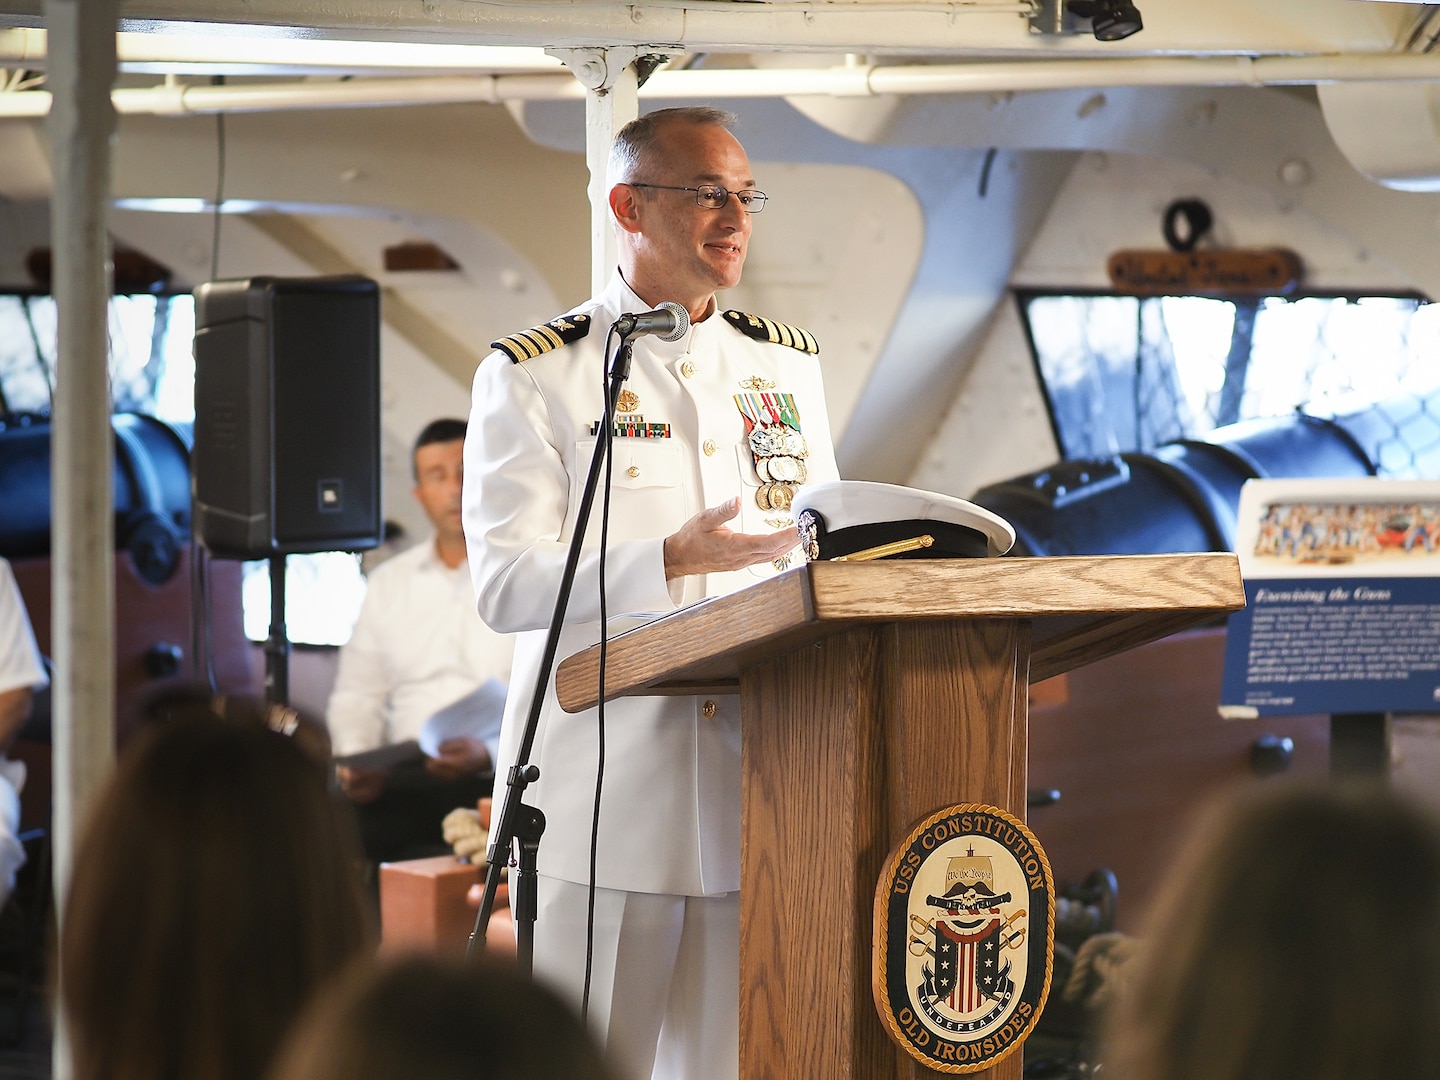 A Navy officer in a white uniform speaks from a podium.